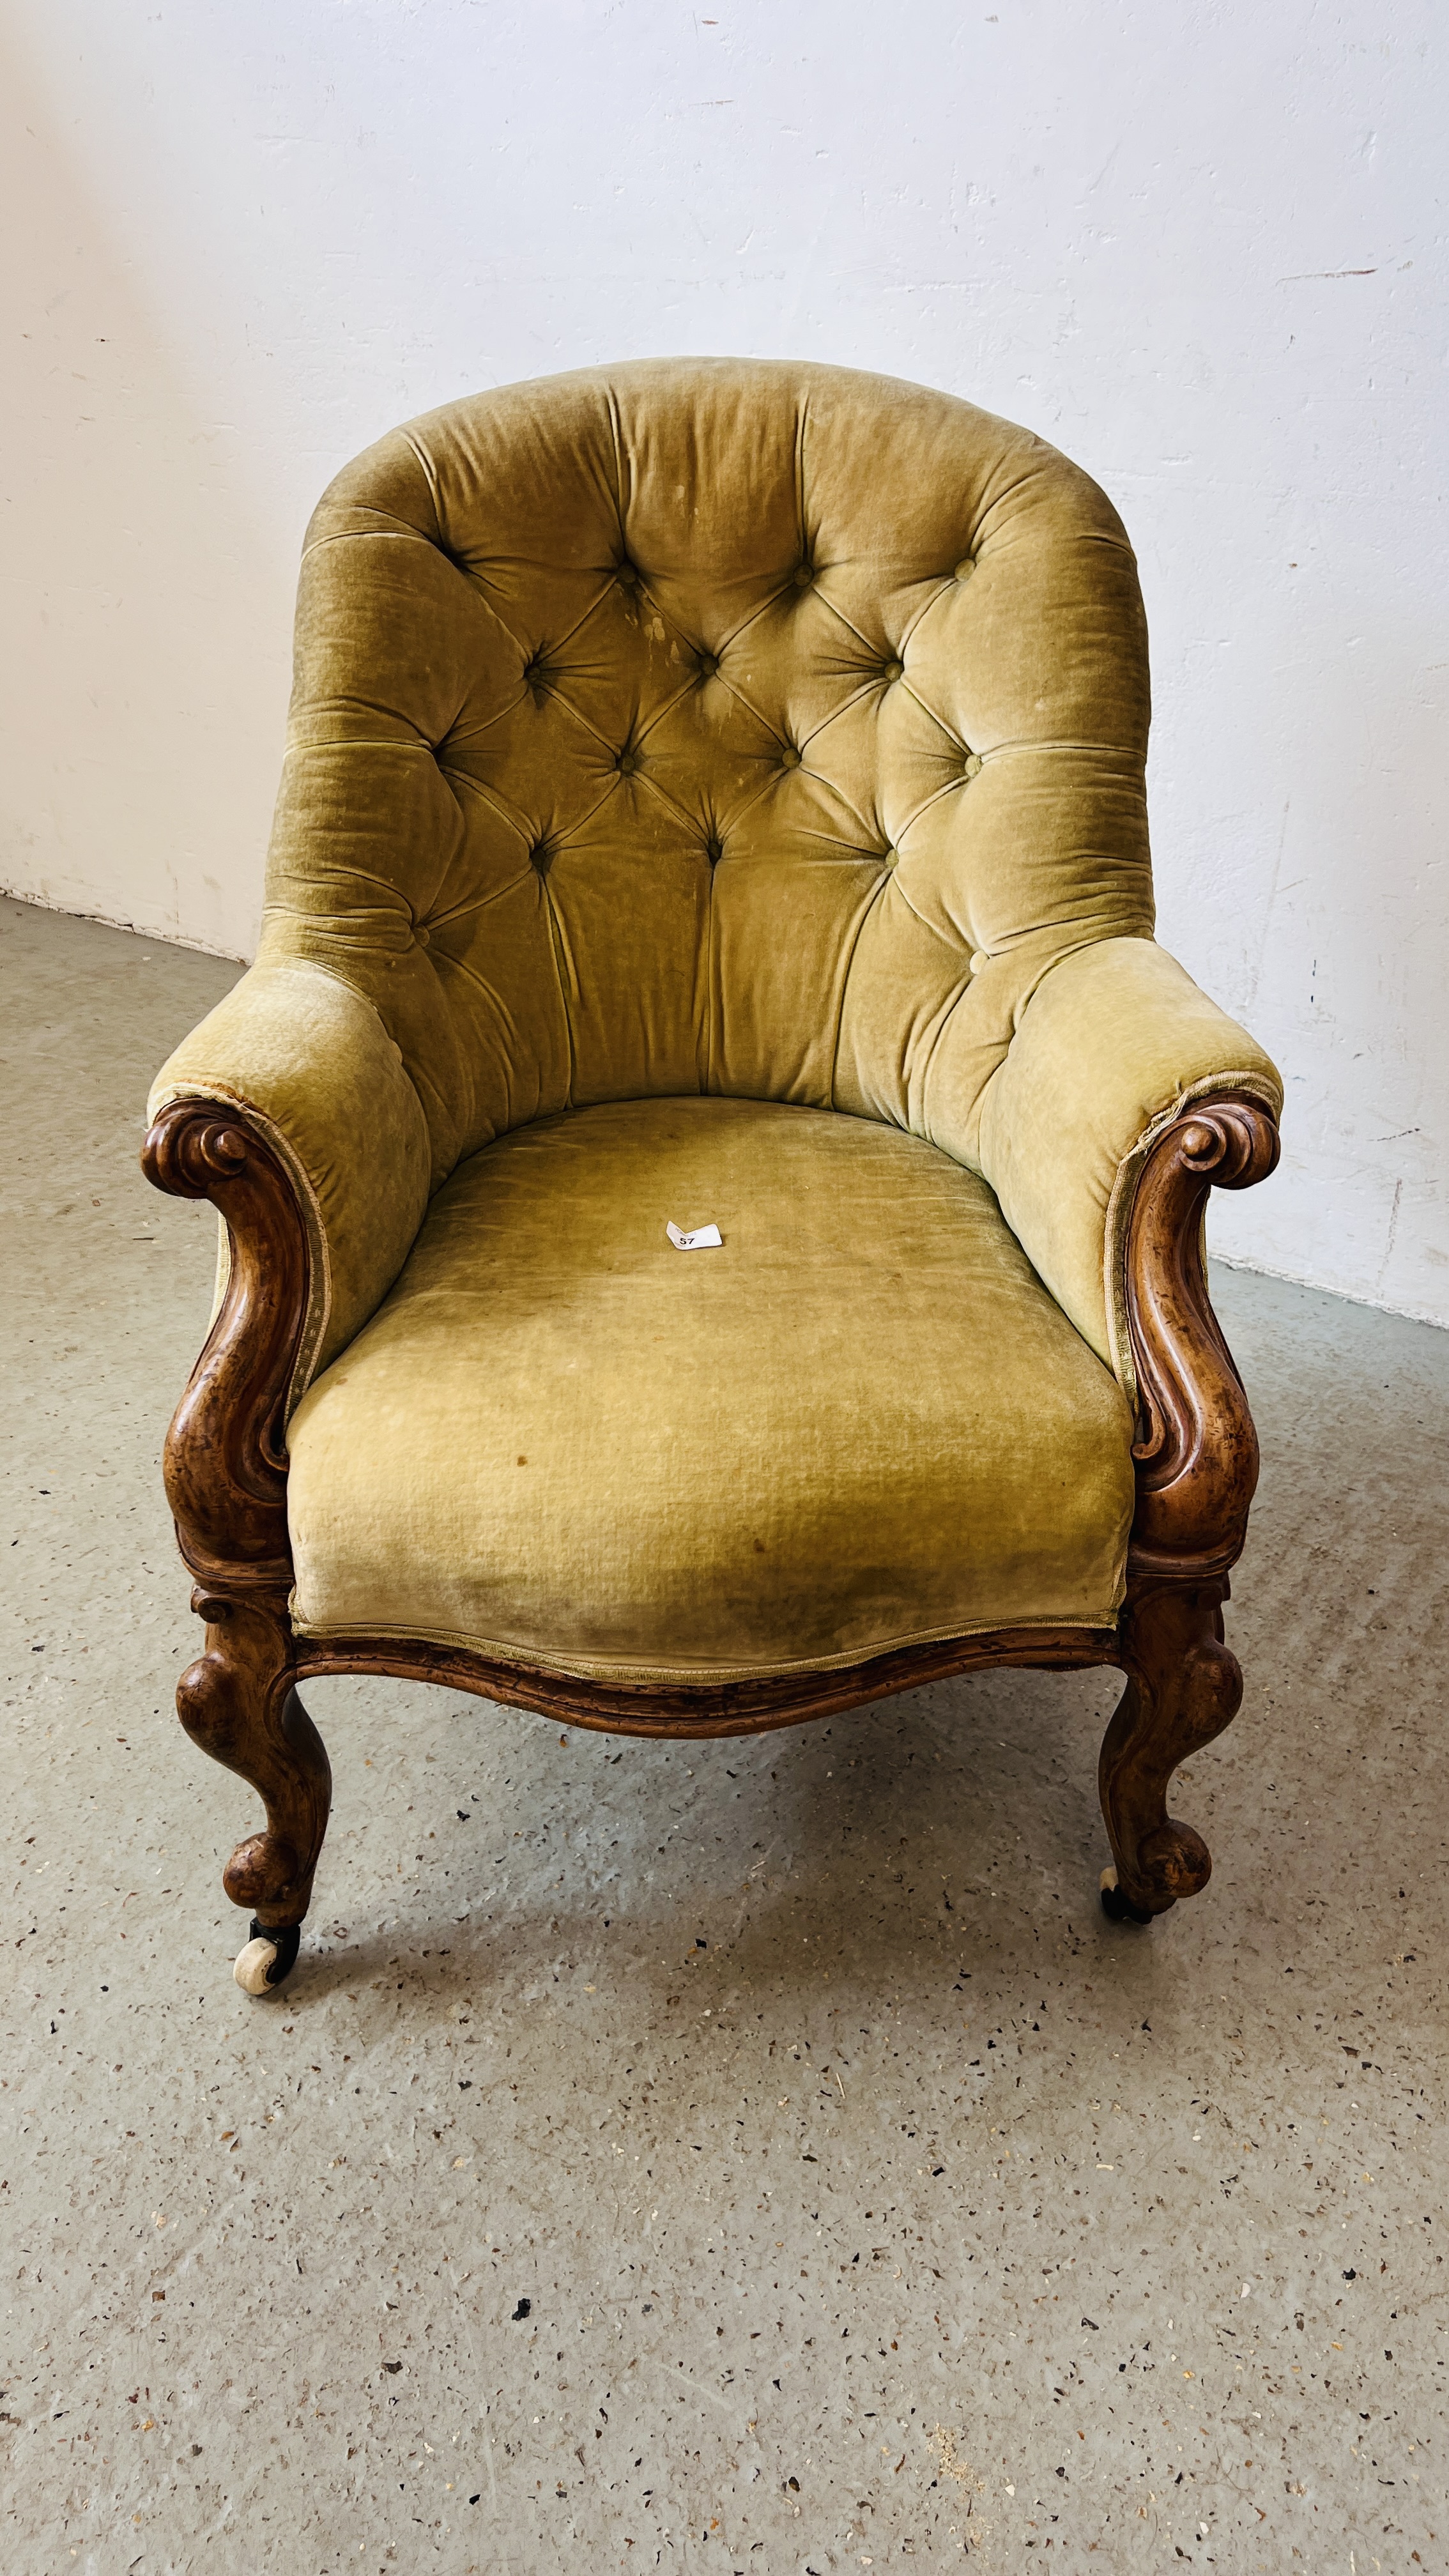 A VICTORIAN MAHOGANY FRAMED BUTTON BACK NURSING CHAIR ON CERAMIC CASTERS. - Image 2 of 9